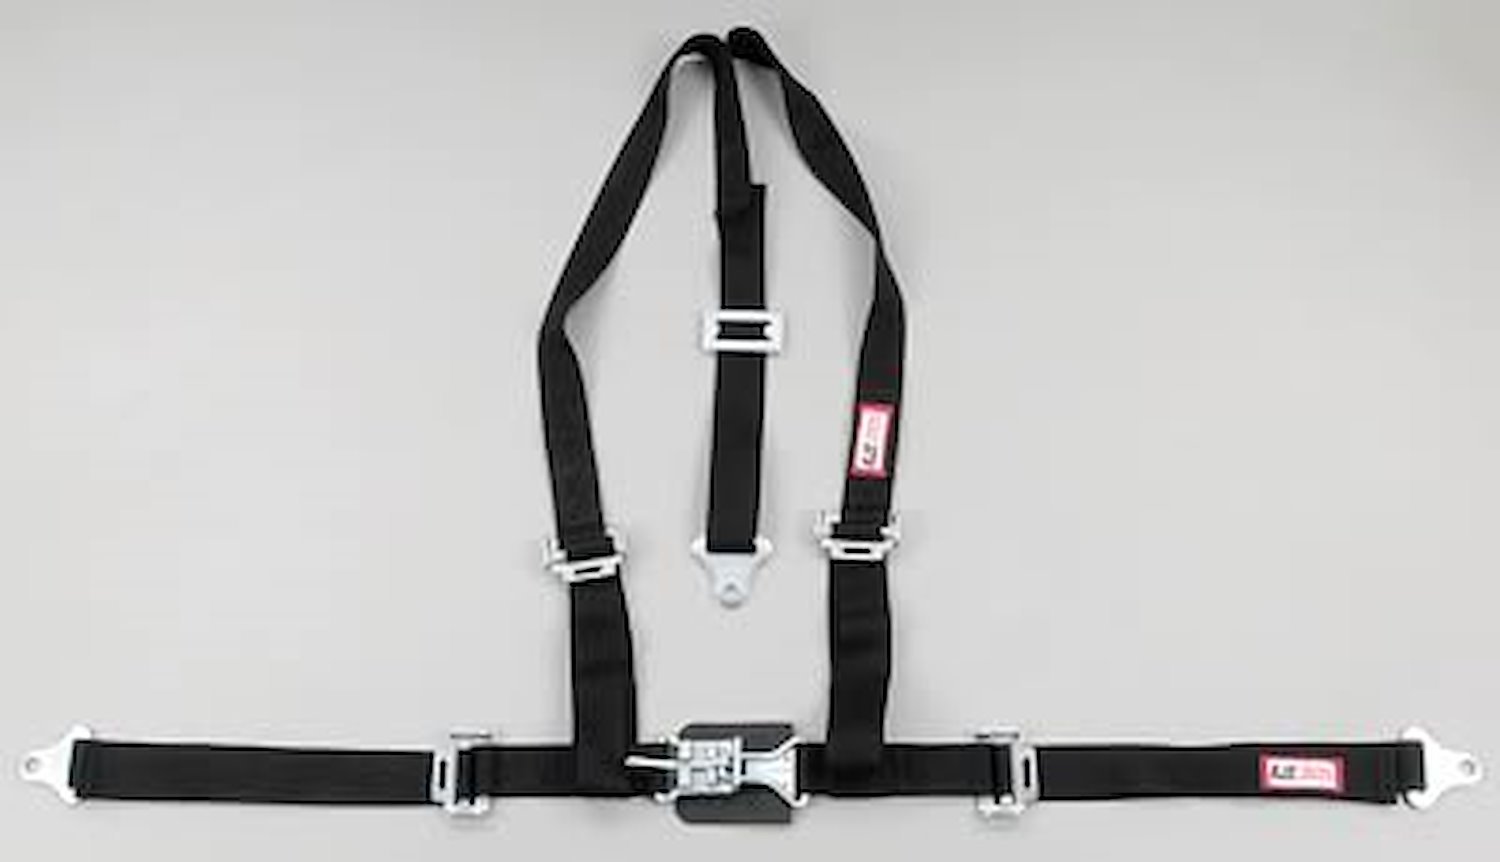 NON-SFI L&L HARNESS 3 PULL UP Lap Belt BOLT SEWN IN 2 S.H. Y FLOOR Mount WRAP/BOLT GRAY